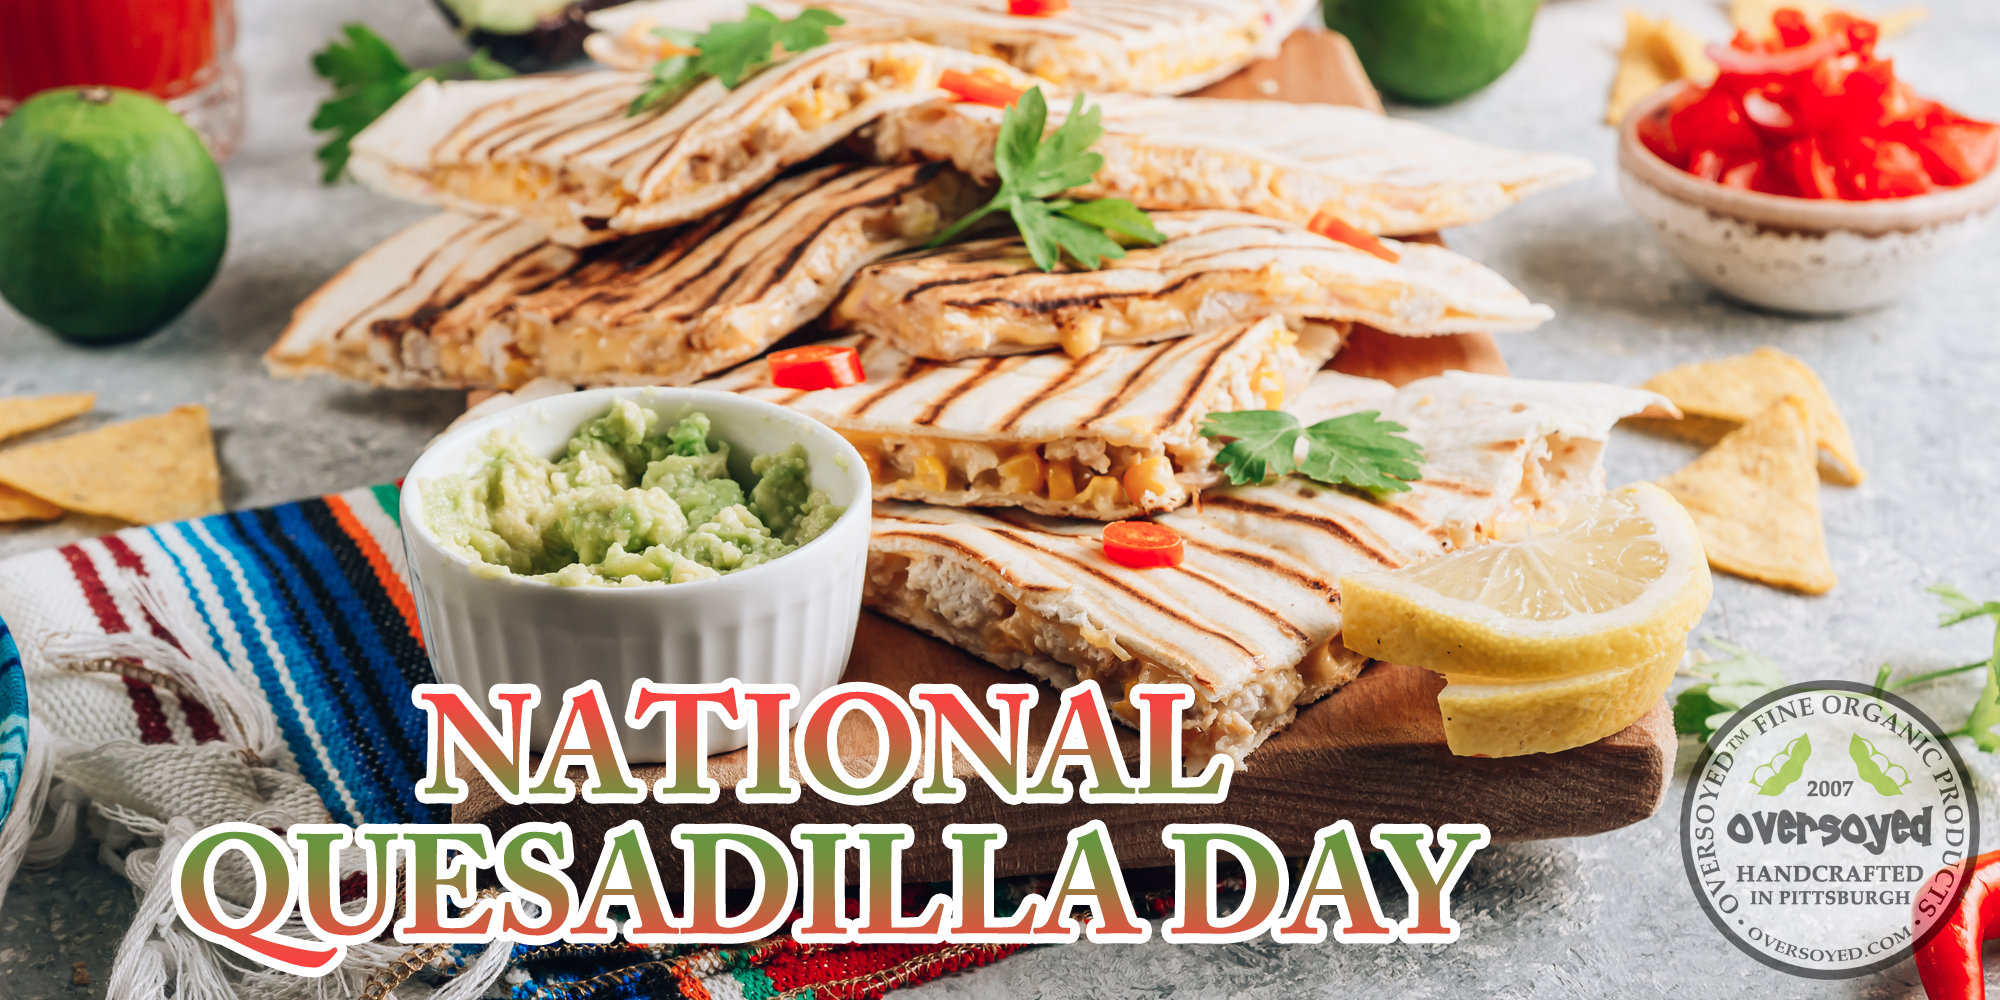 OverSoyed Fine Organic Products - National Quesadilla Day